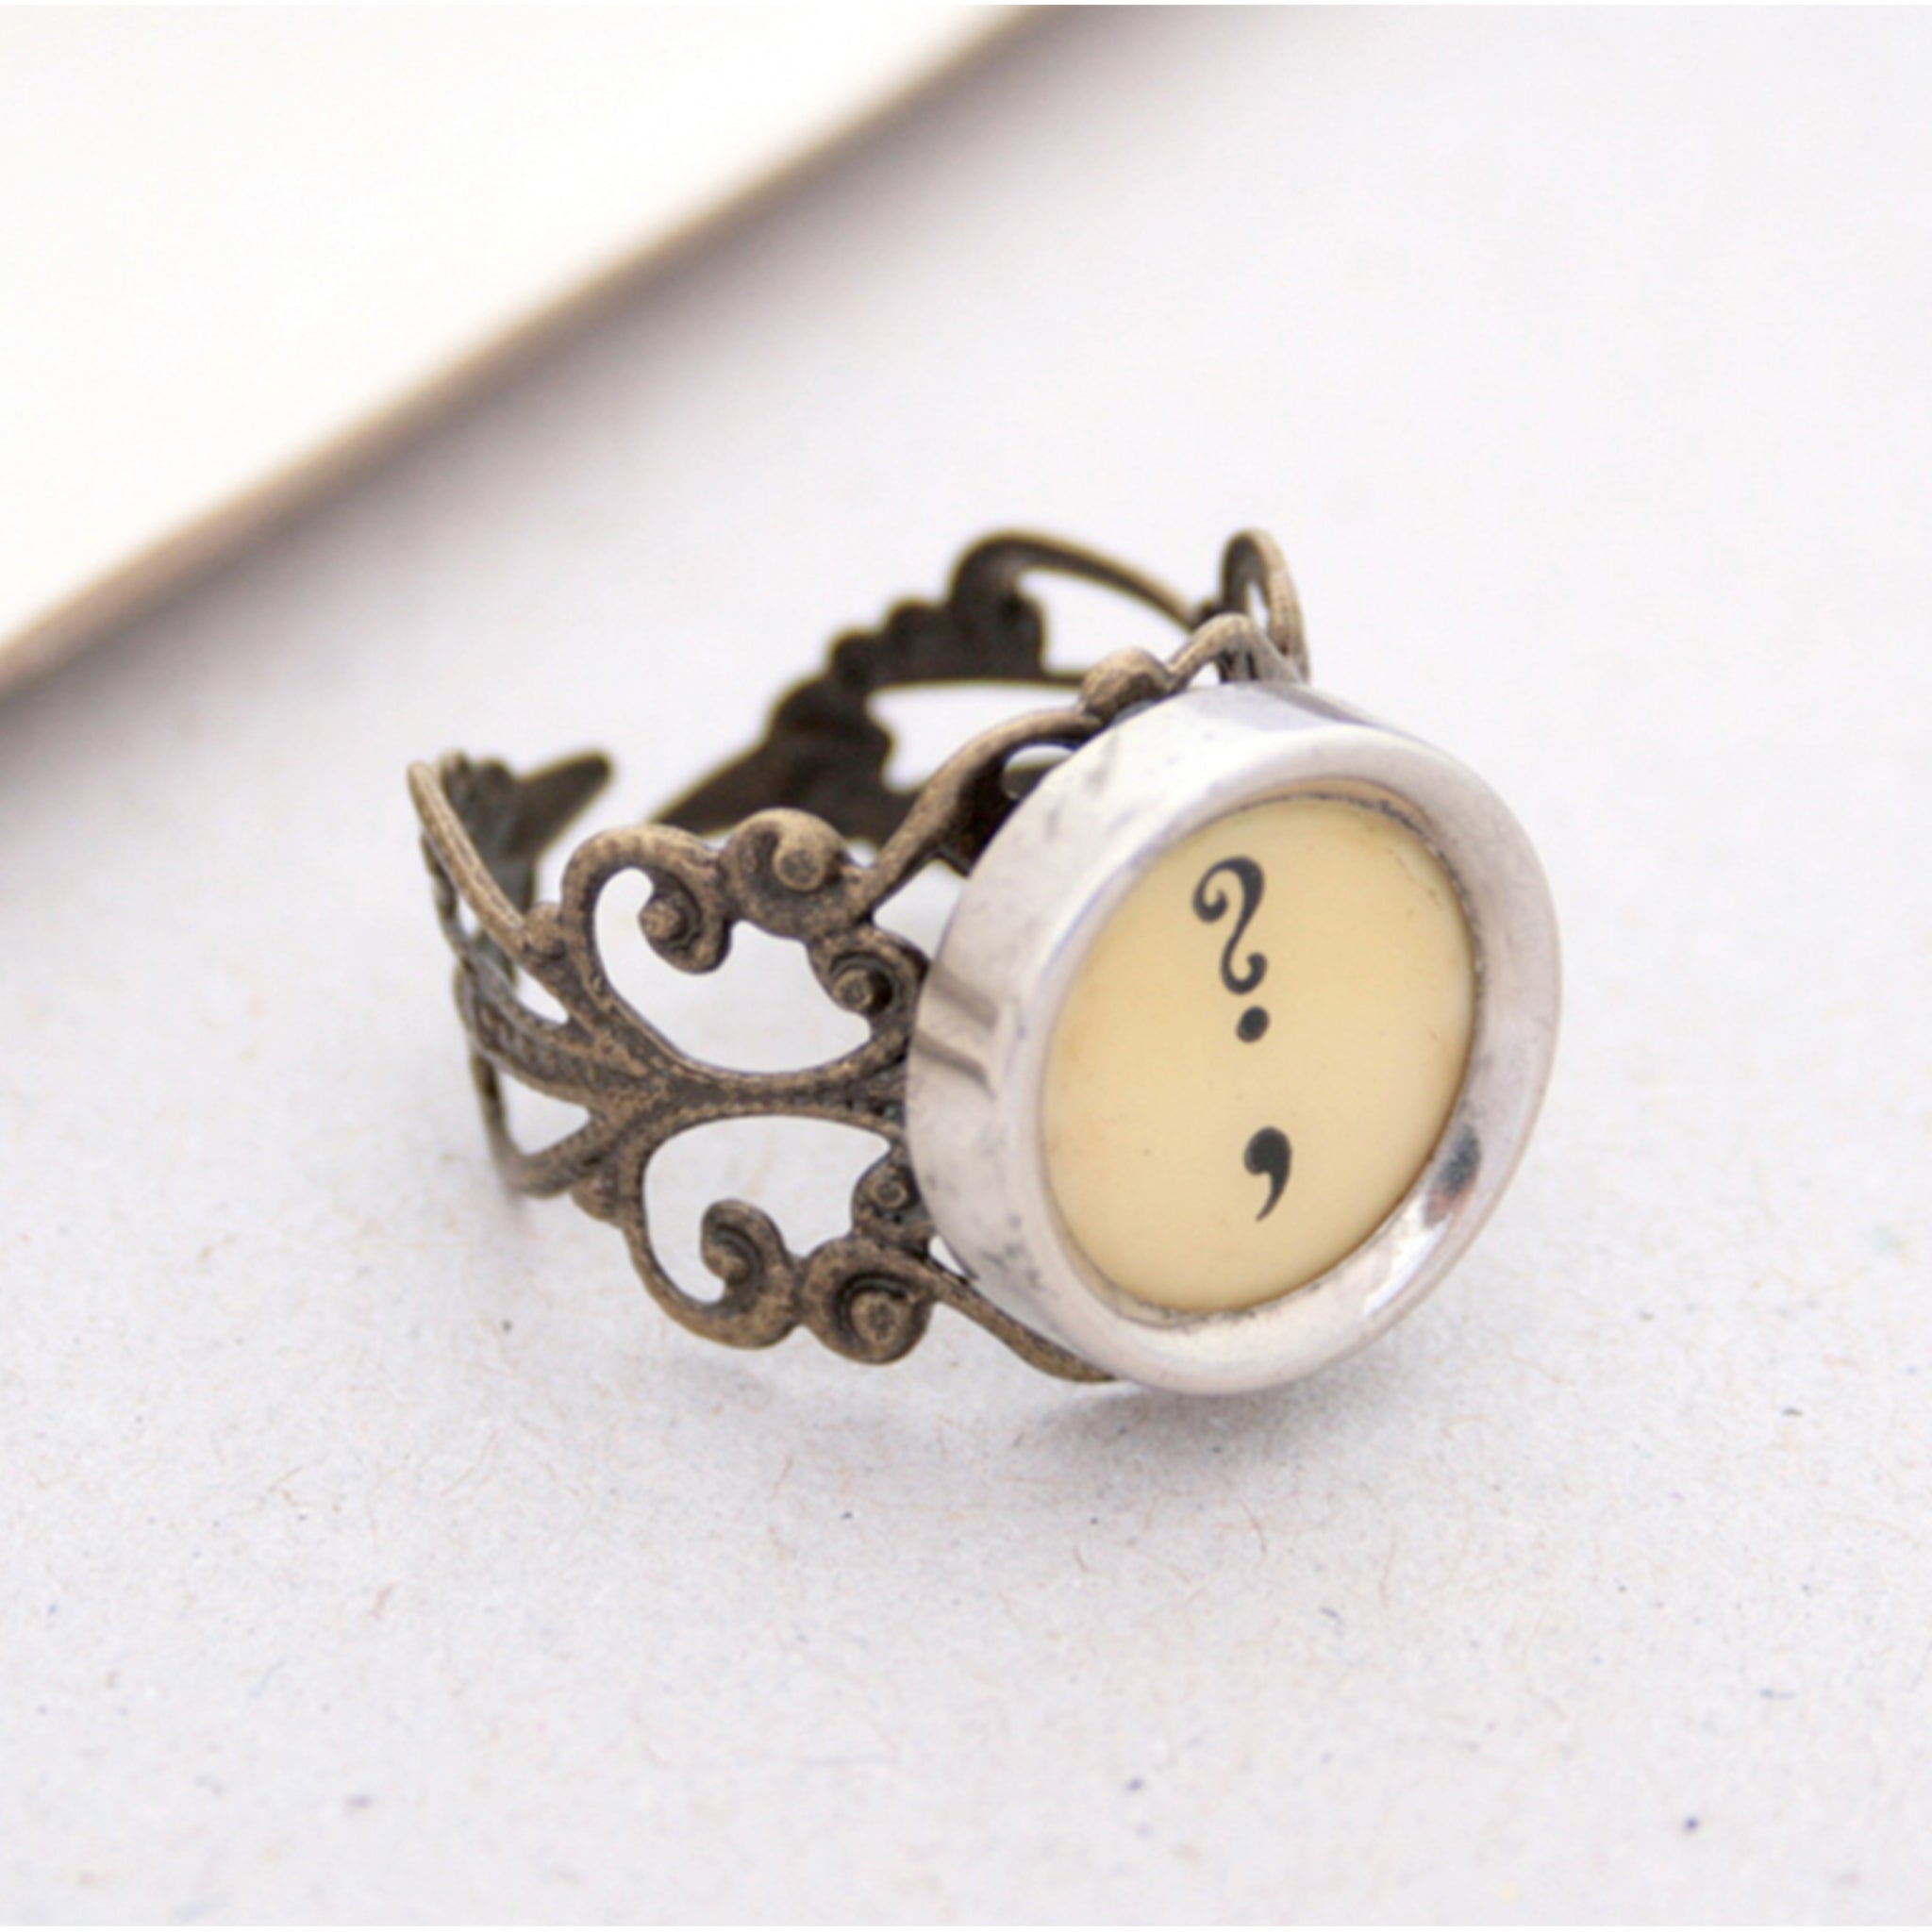 Ring with question mark and comma made of  typewriter key in ivory color